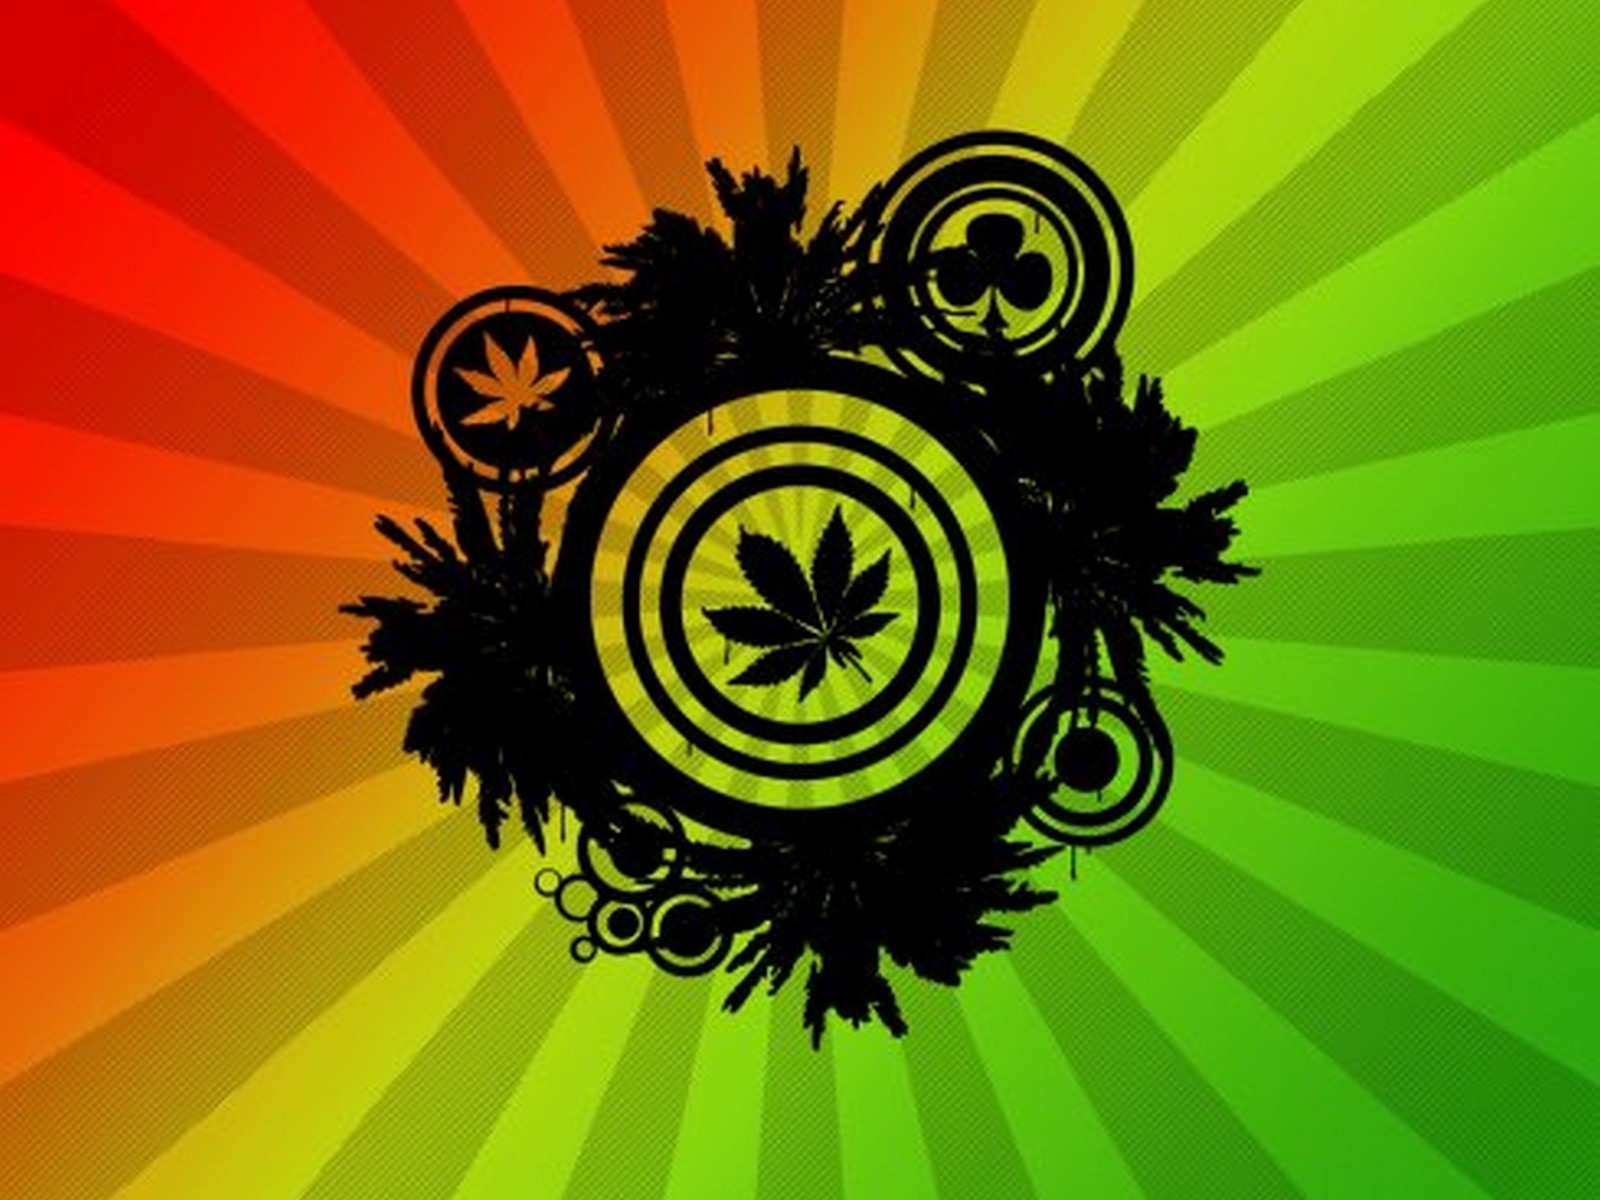 Stoner Wallpaper Weed iPhone Related